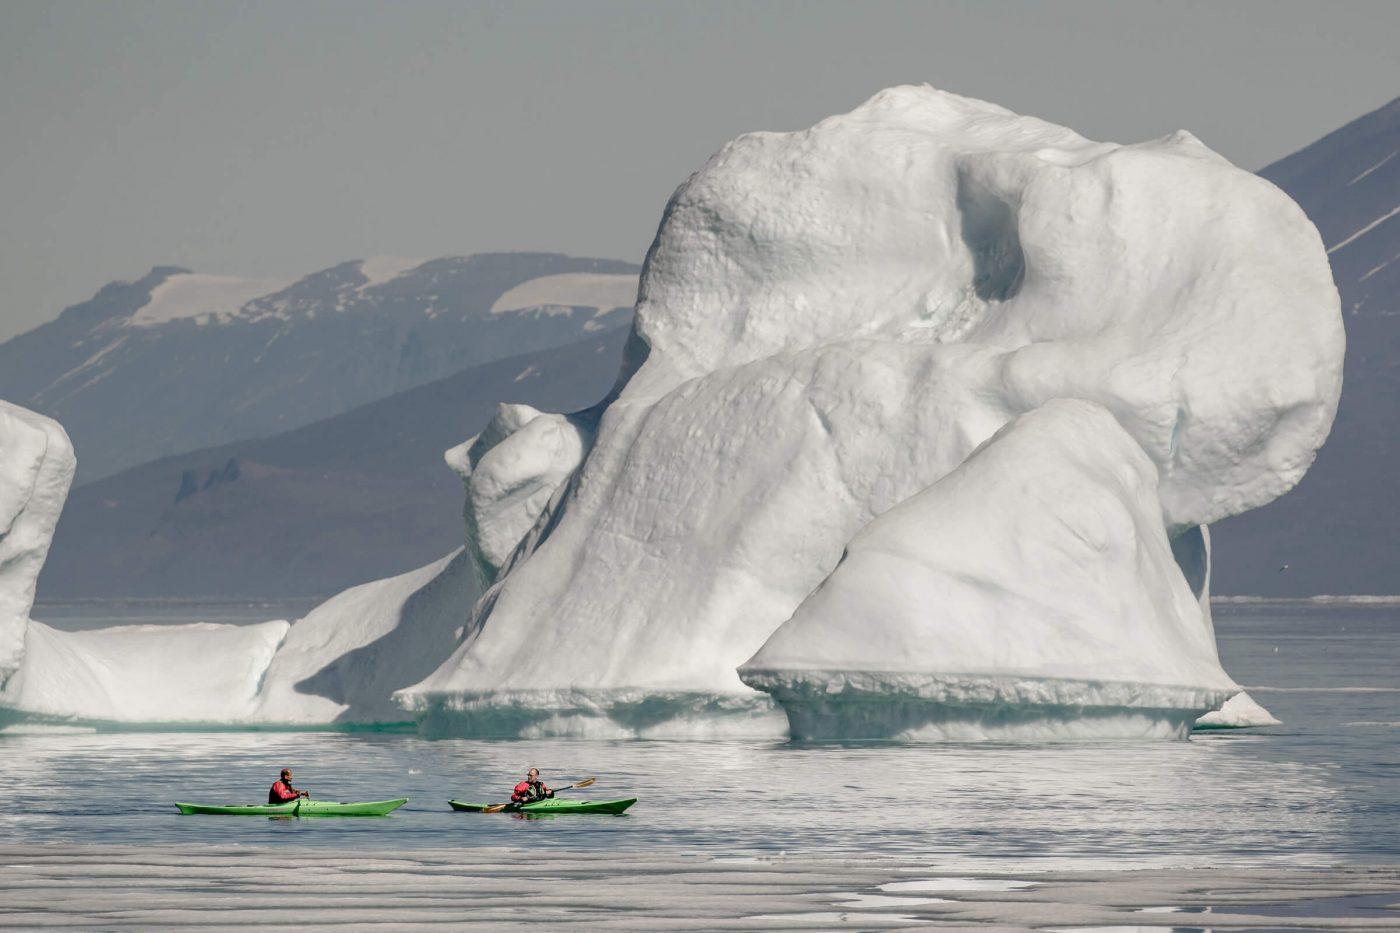 Kayakers near an iceberg in Illorsuit in North Greenland. By Mads Pihl